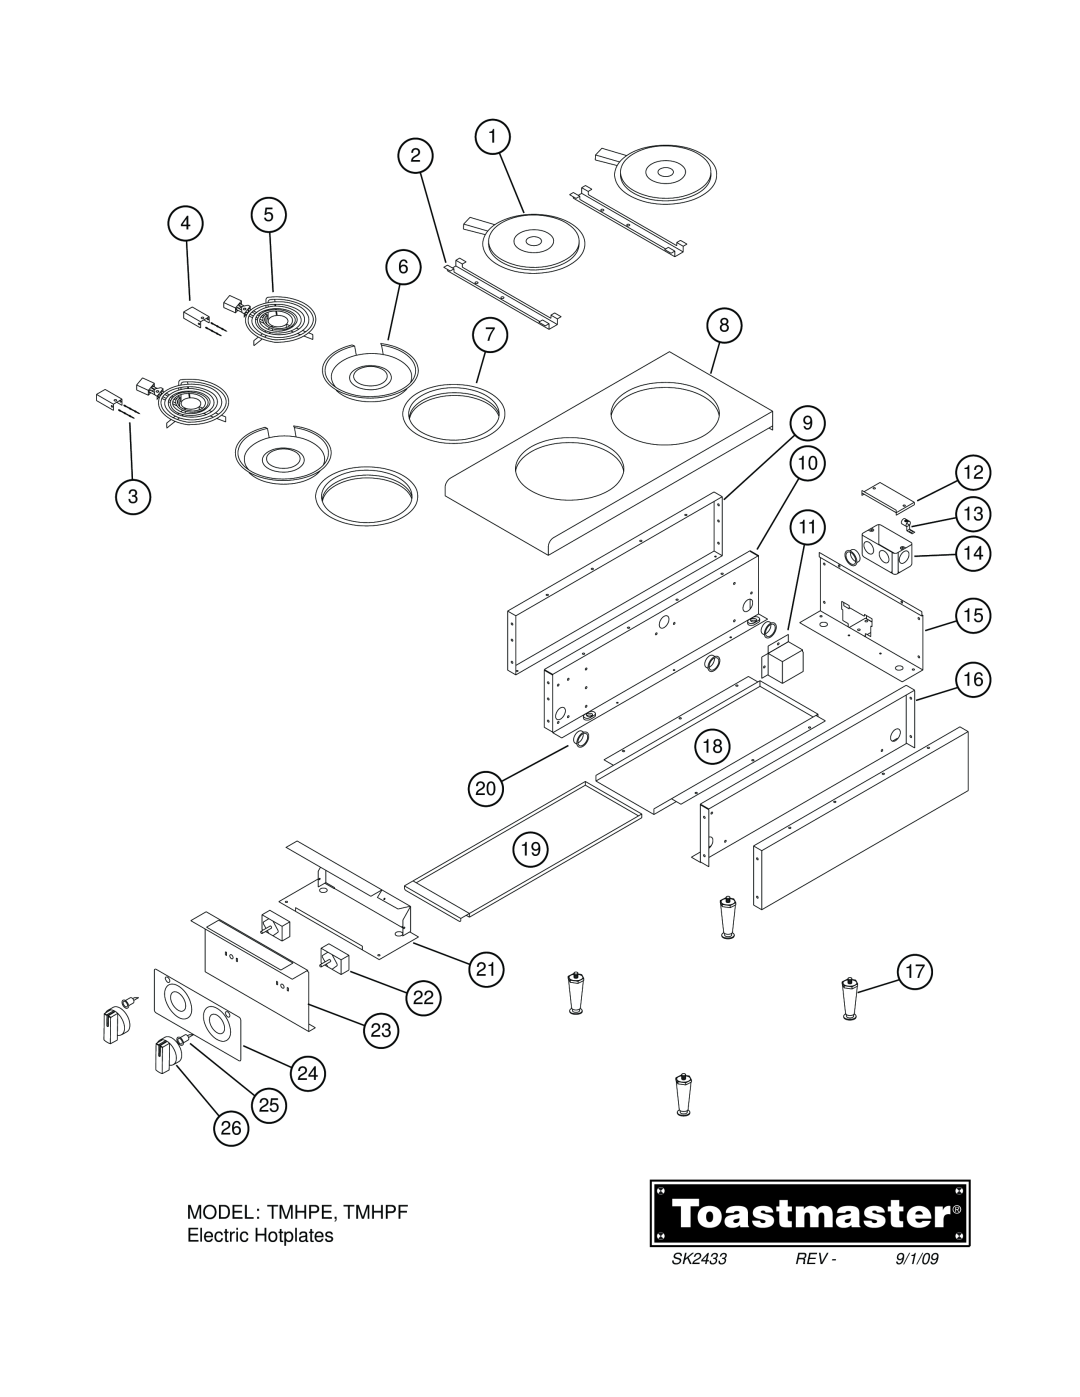 Toastmaster TMPHF manual MODEL TMHPE, TMHPF Electric Hotplates, SK2433, 9/1/09 